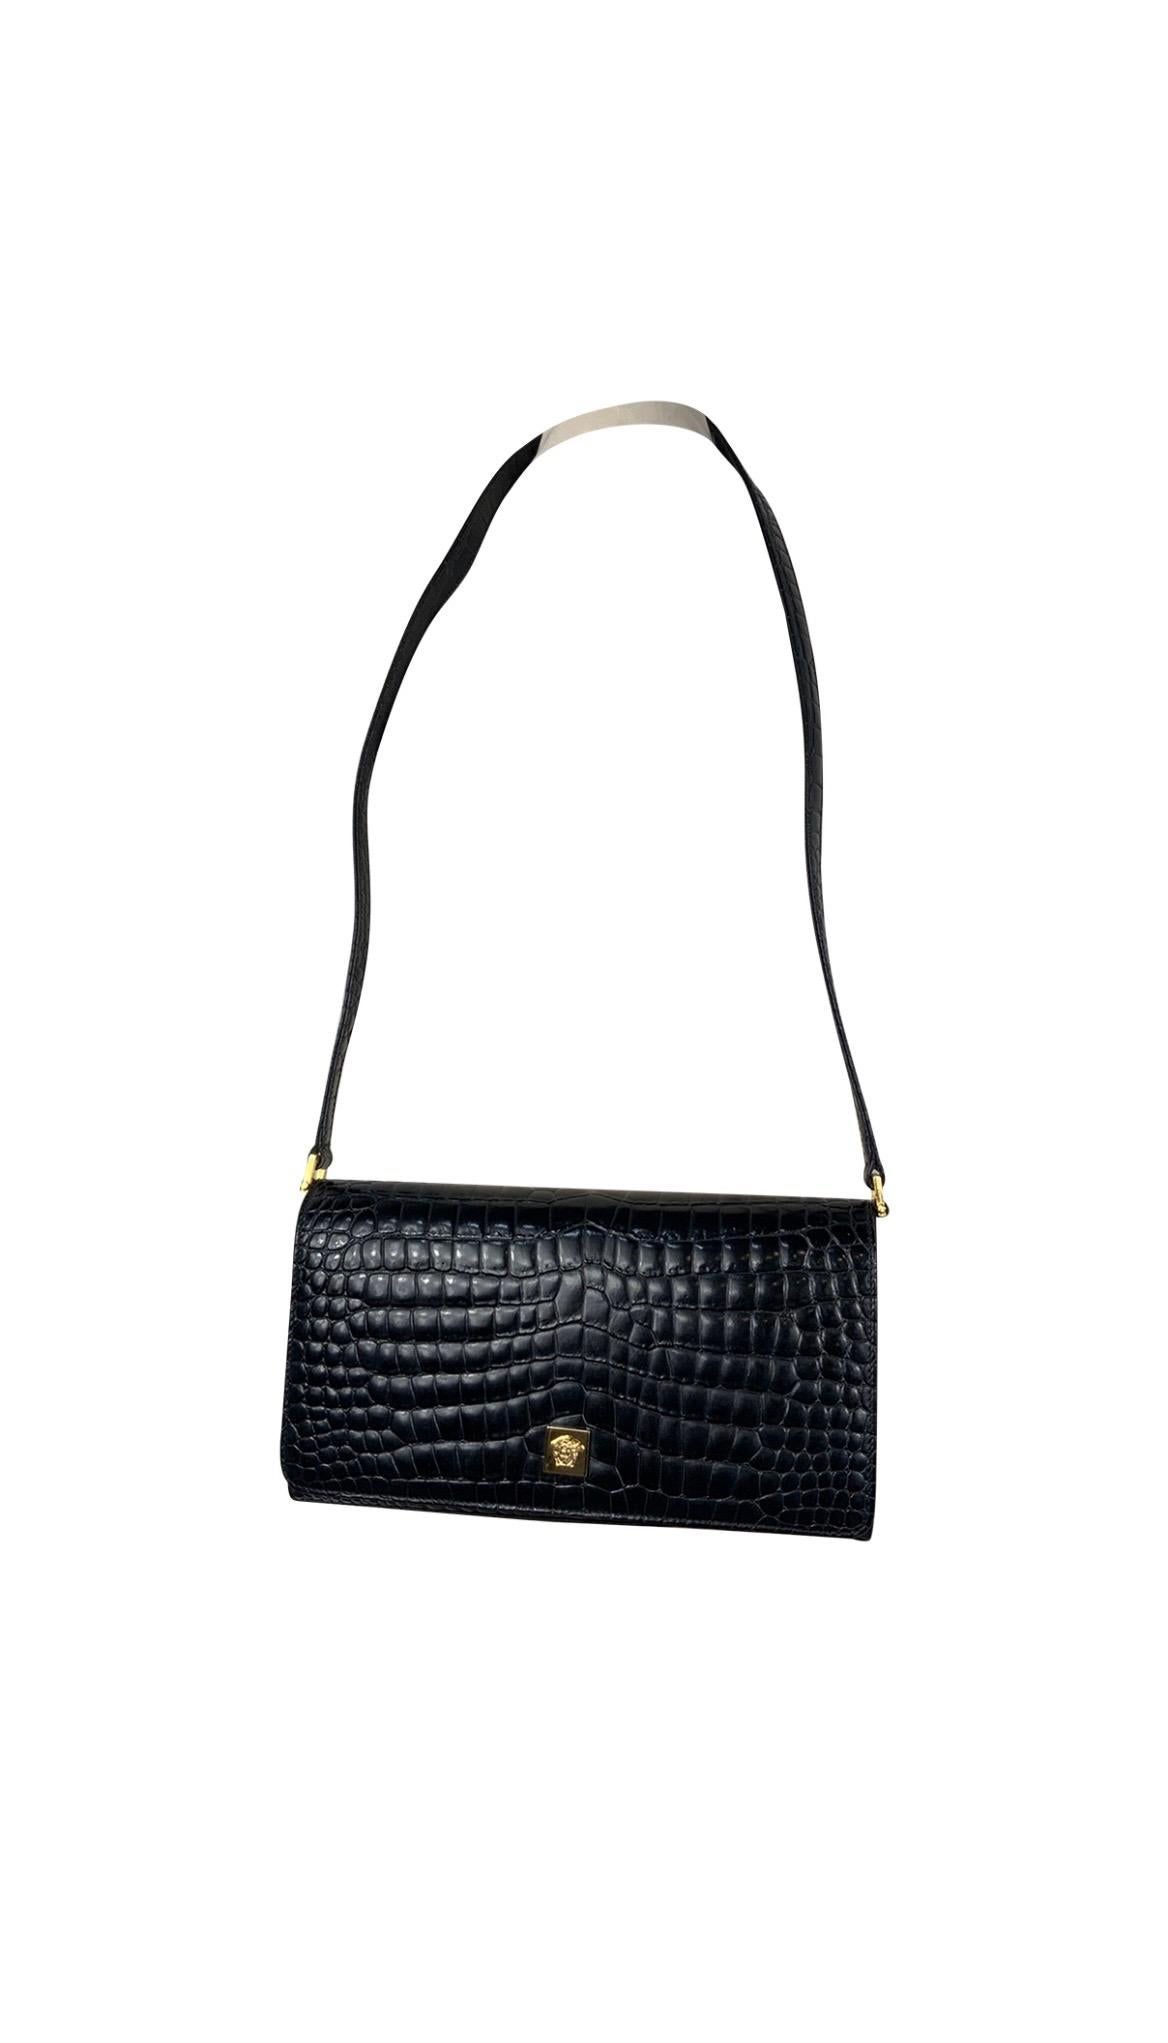 Gianni Versace bag.
In black leather and gold hardware. Crocodile print.
Leather interior.
If desired, the handle can be hidden inside the bag.
Height 16 cm
Width 28 cm
Depth 9 cm
Handle 50 cm
Excellent general condition, it shows tiny signs of